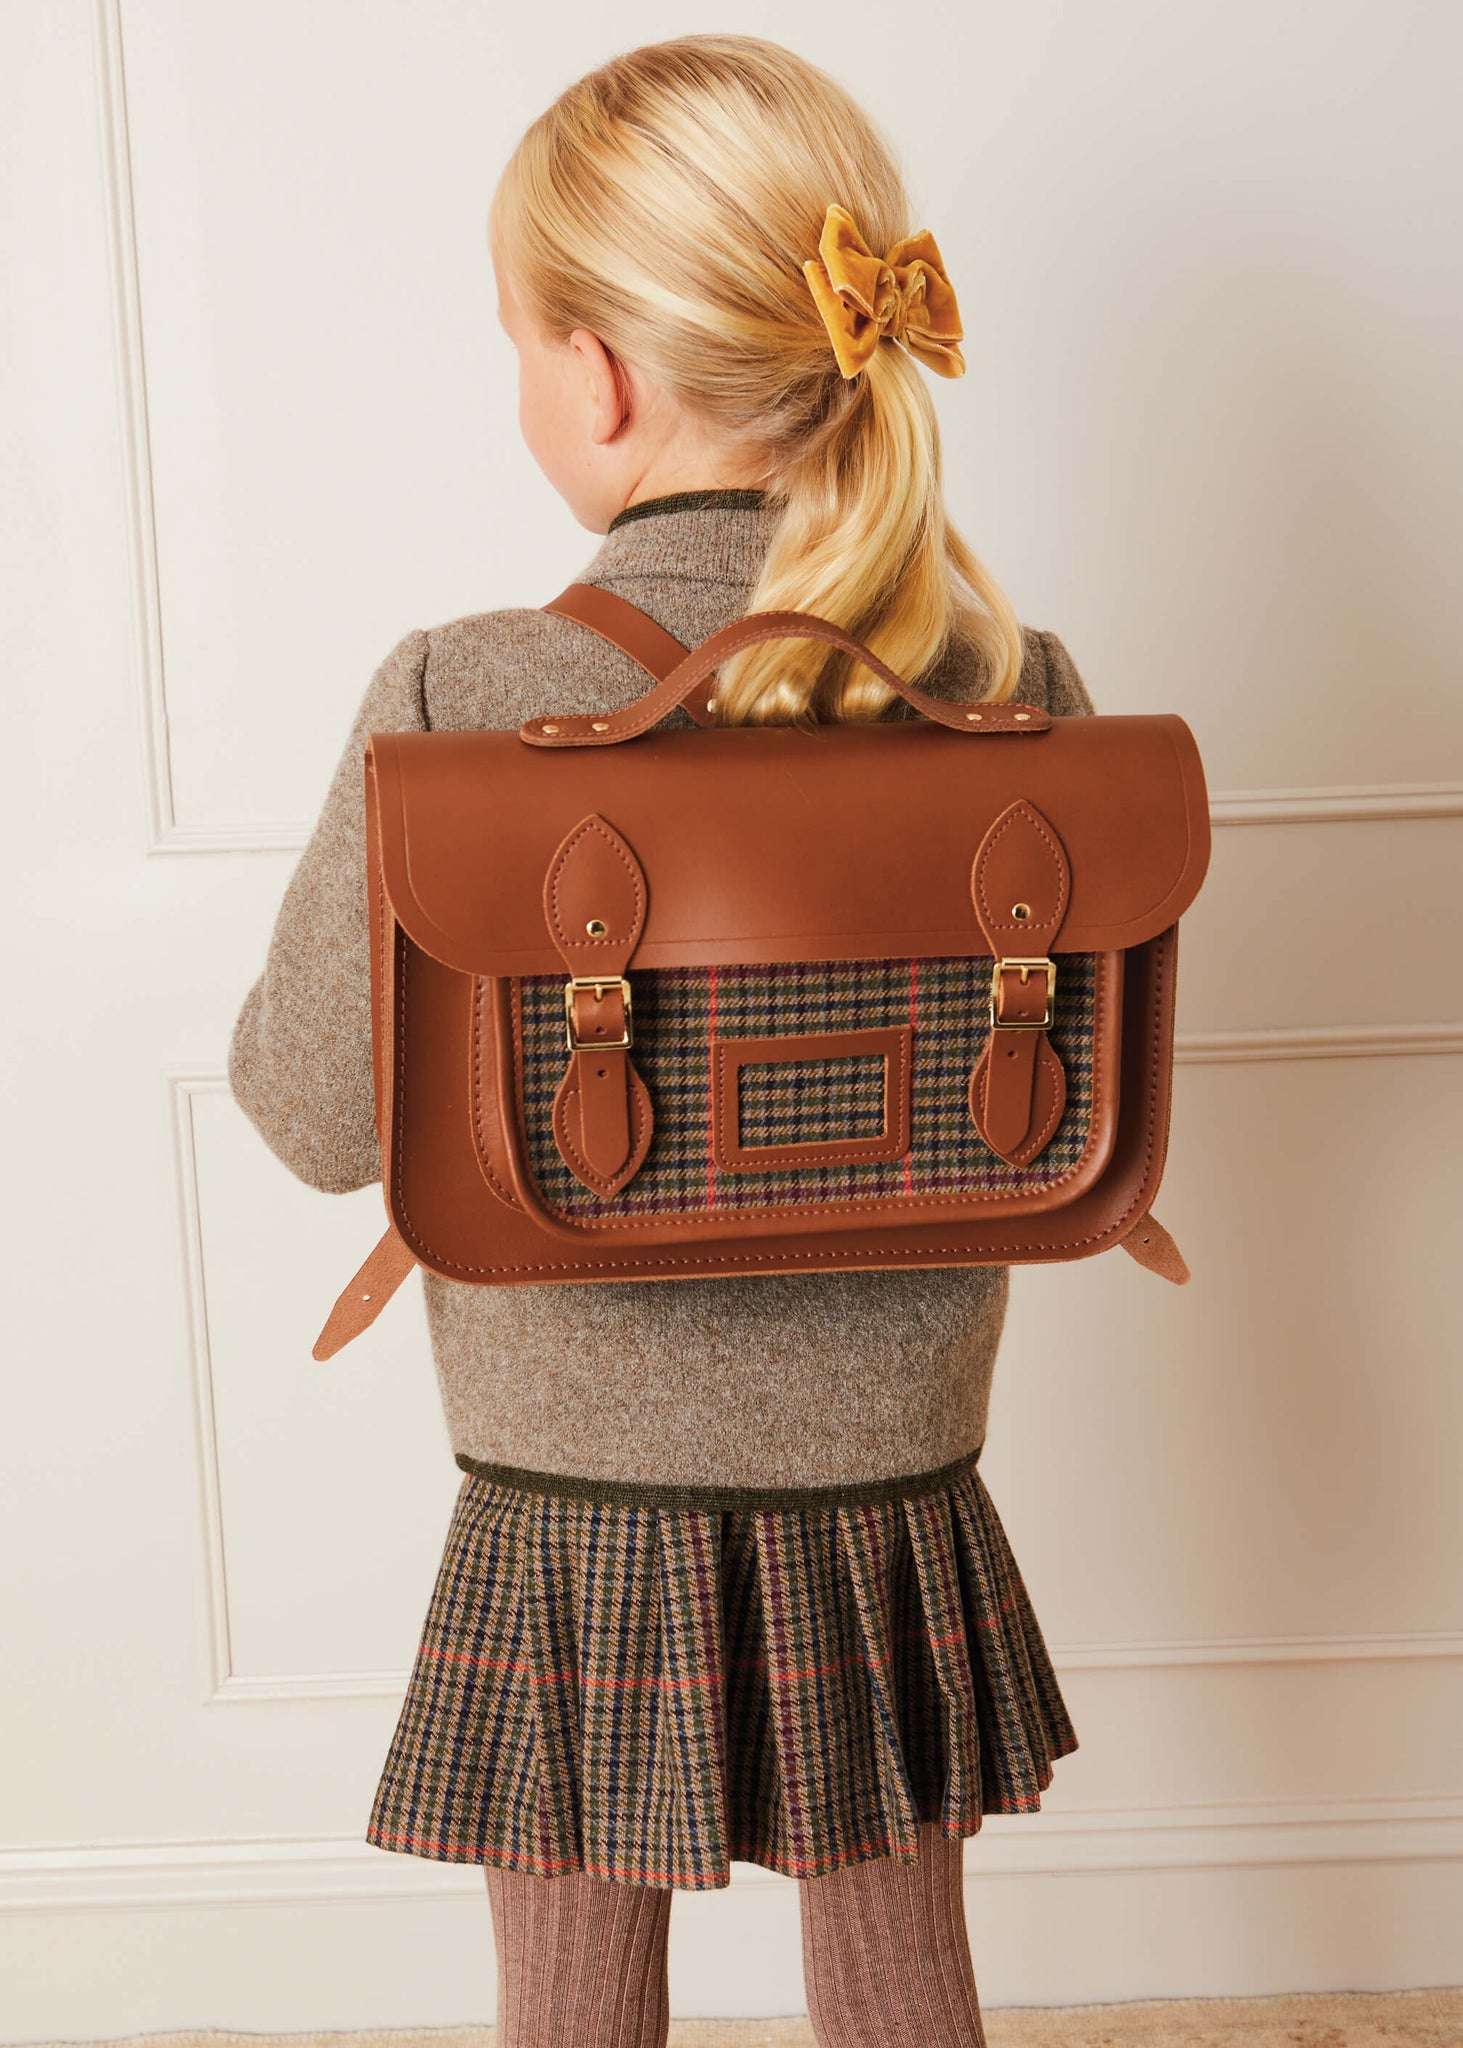 Limited-Edition Cambridge Satchel Co. & Pepa London Backpack in Brown Accessories  from Pepa London